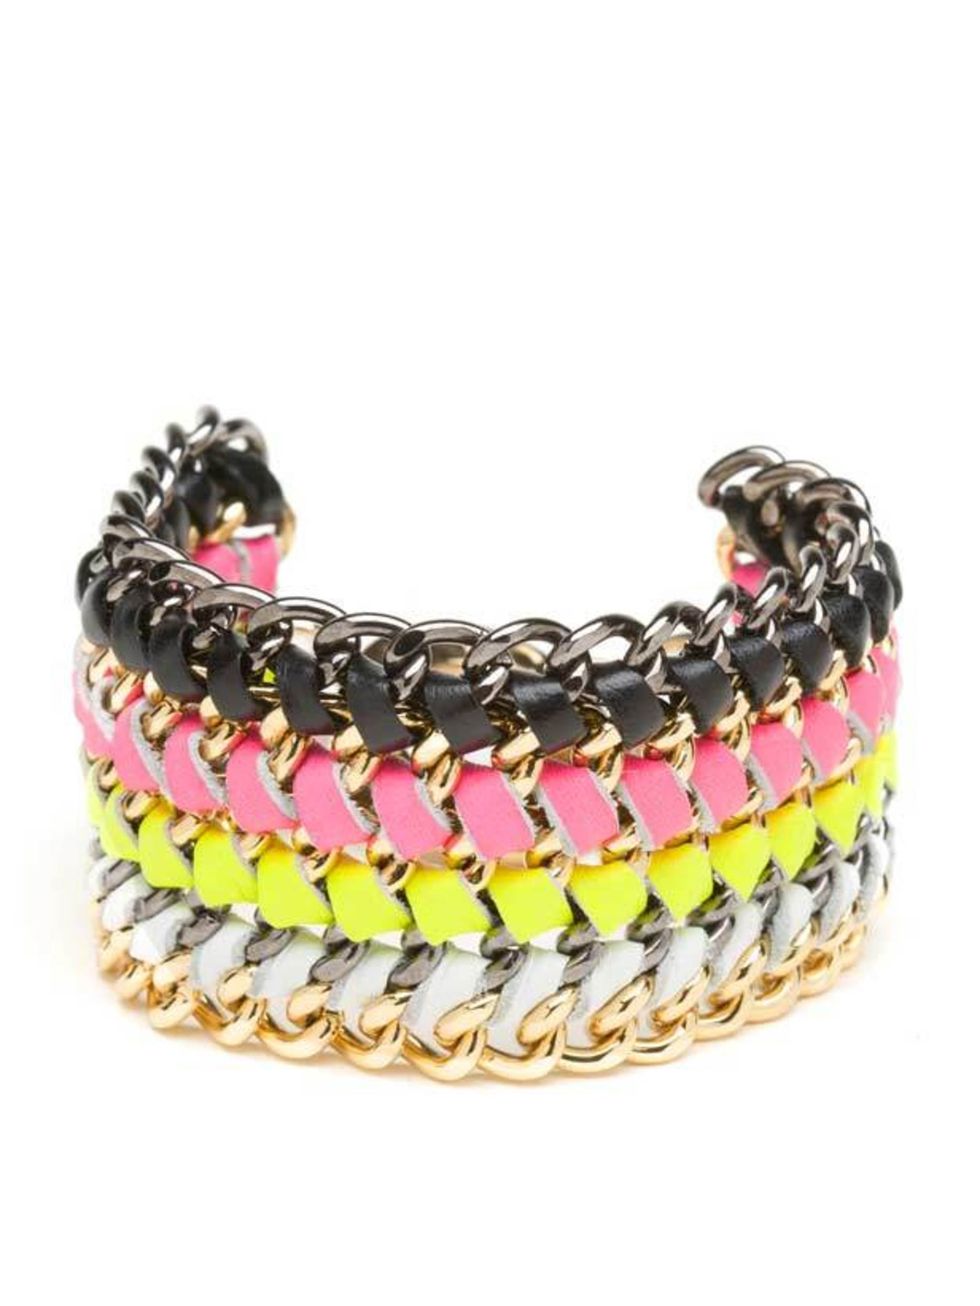 <p> </p><p>Neon is set to be a huge trend come spring so get in on the act early and add an instant hit of colour to Februarys dark clothes CC Skye neon bracelet, £110, at <a href="http://www.oxygenboutique.com/product/oxygen/cc-skye-lindsey-bracelet---